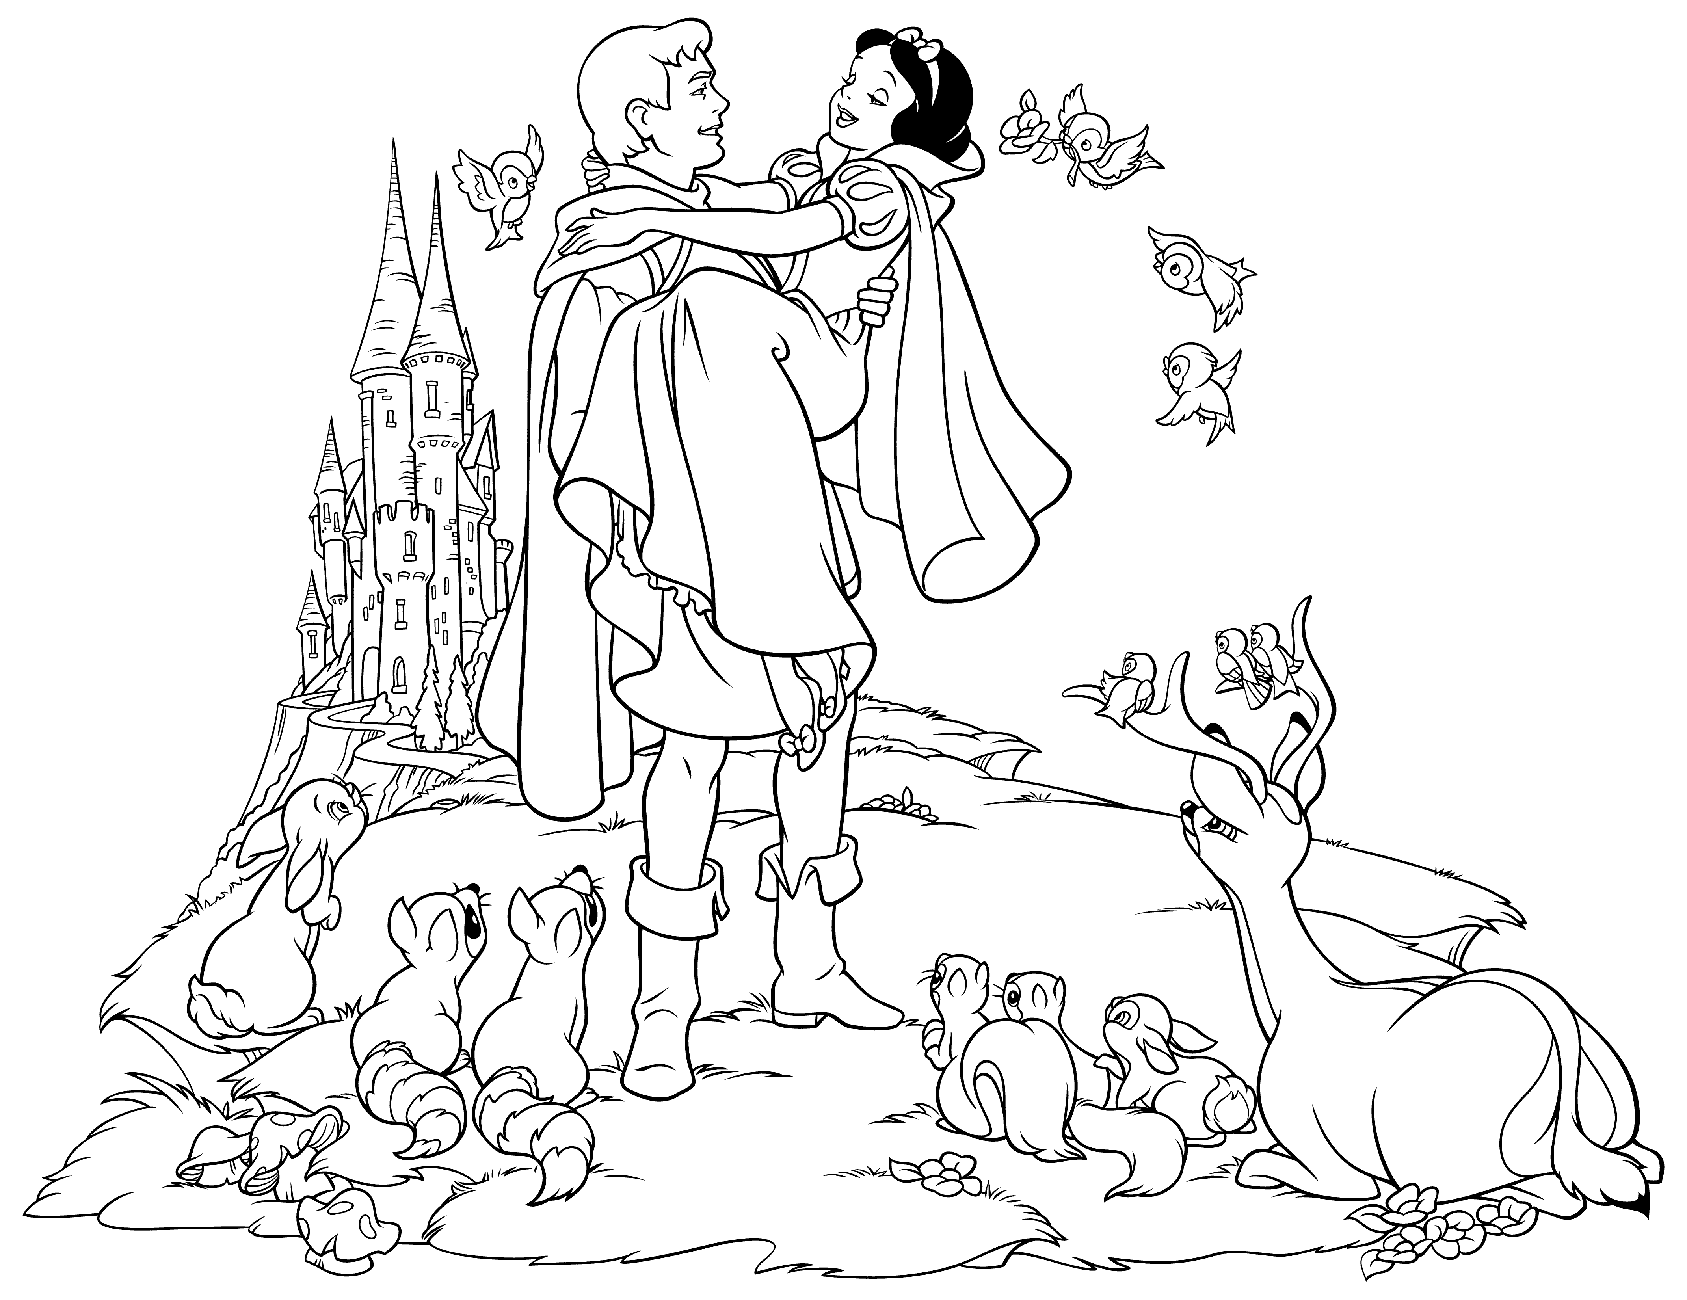 Coloring page - Prince and Snow White get married